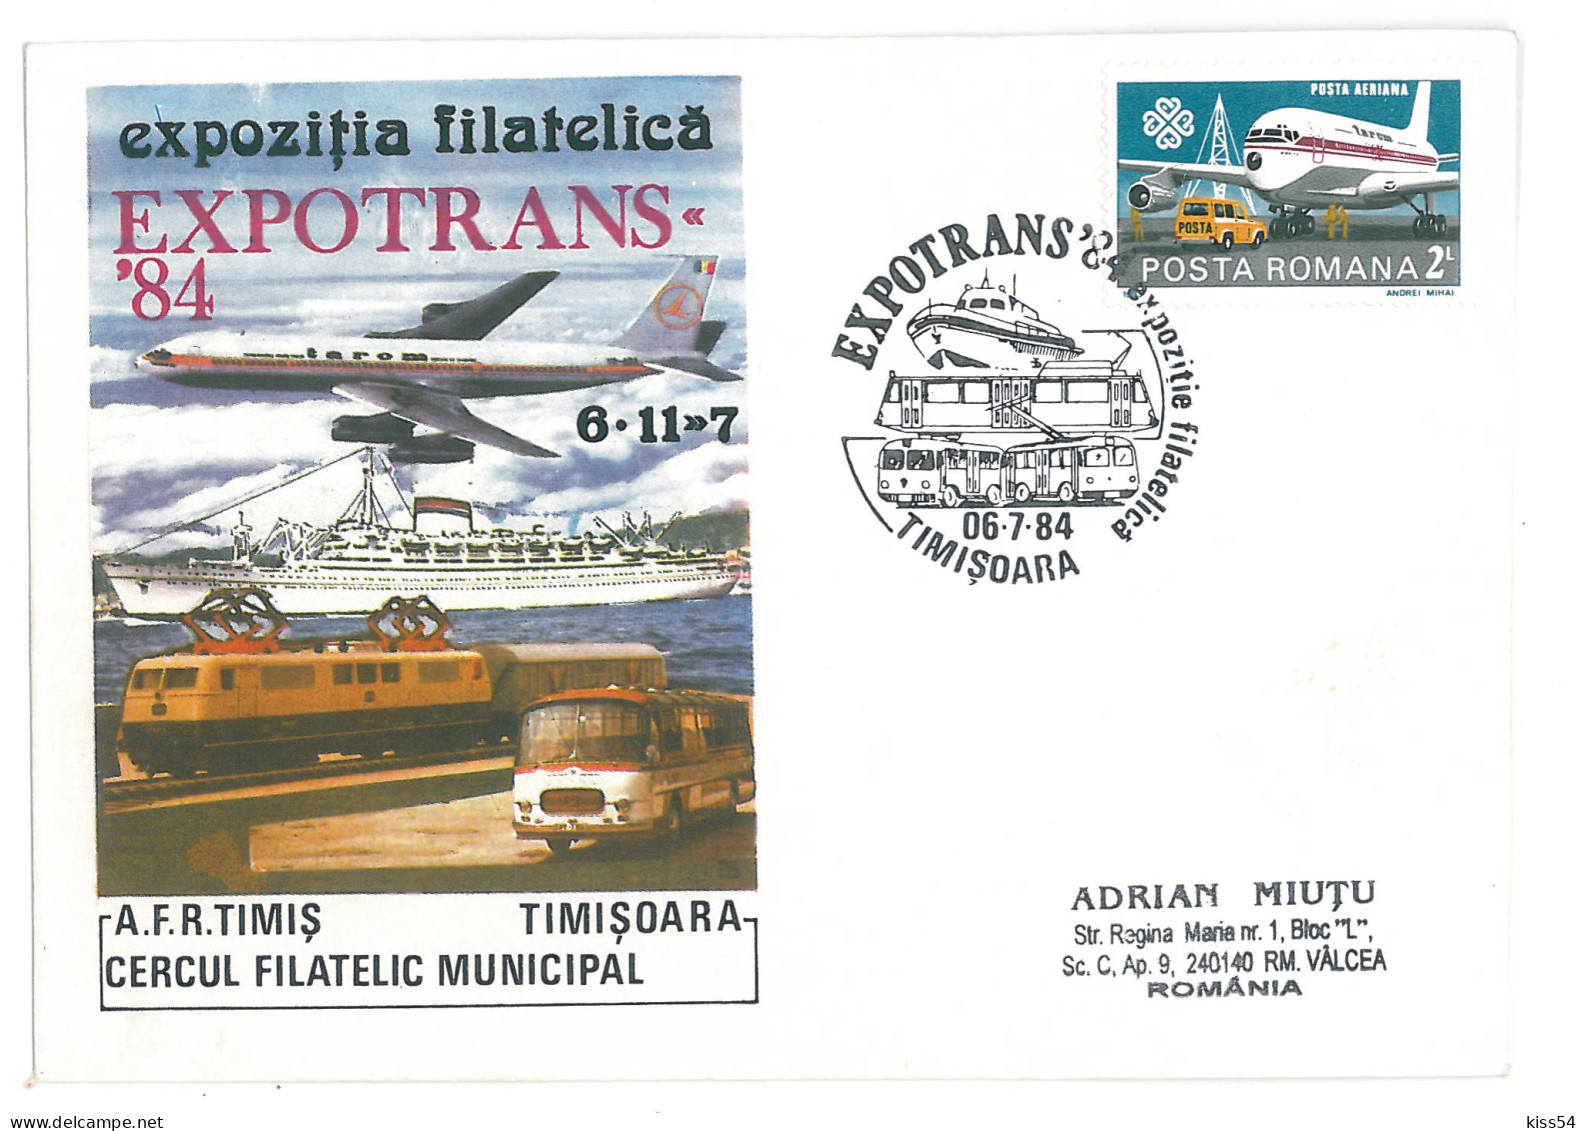 COV 35 - 346 TRANSPORT, Romania - Cover - Used - 1984 - Covers & Documents